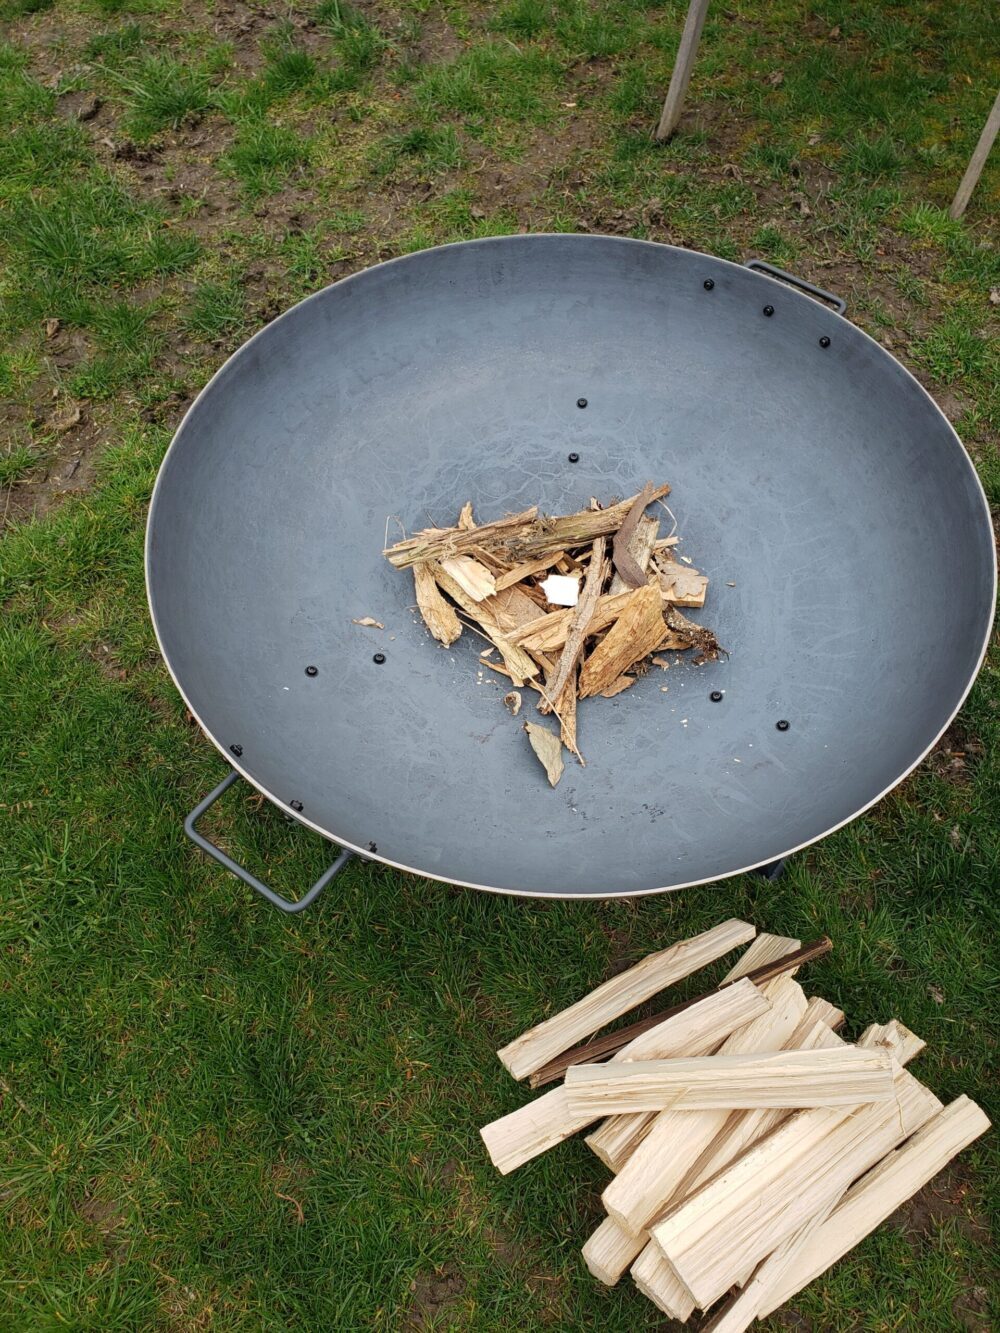 starting a fire in a fire pit